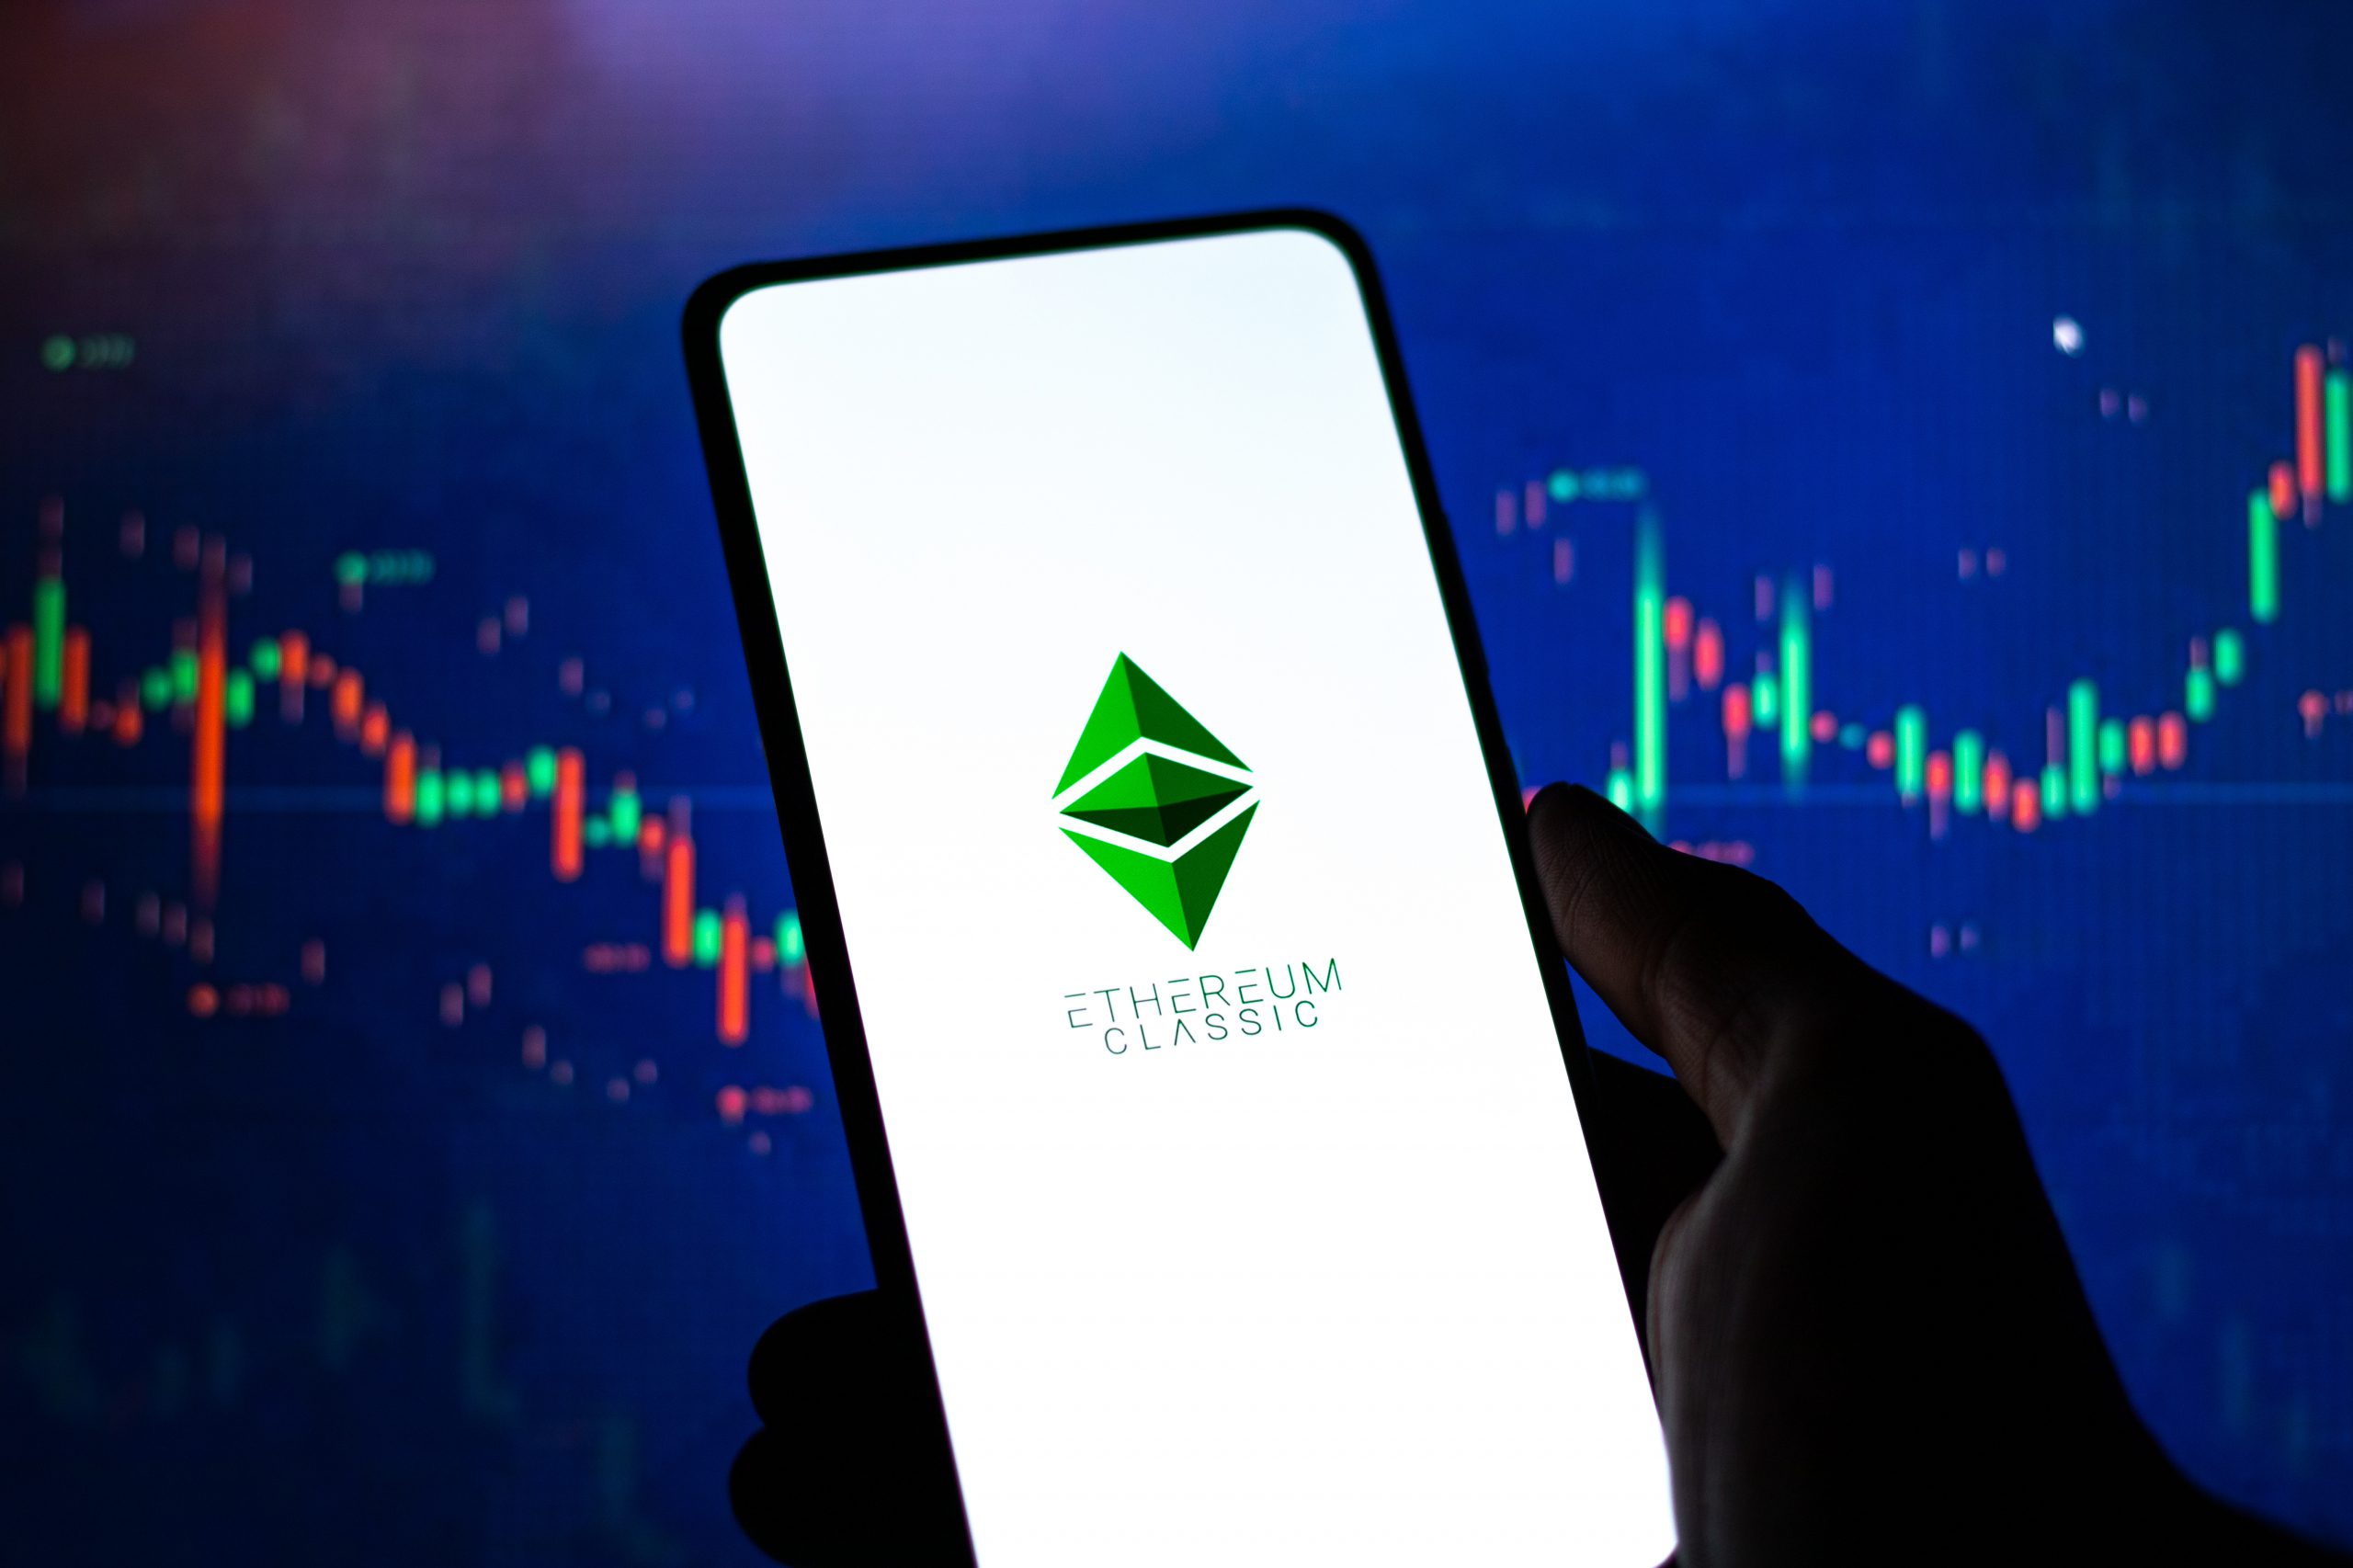 Ethereum Classic price rises to highest point in 4 months
